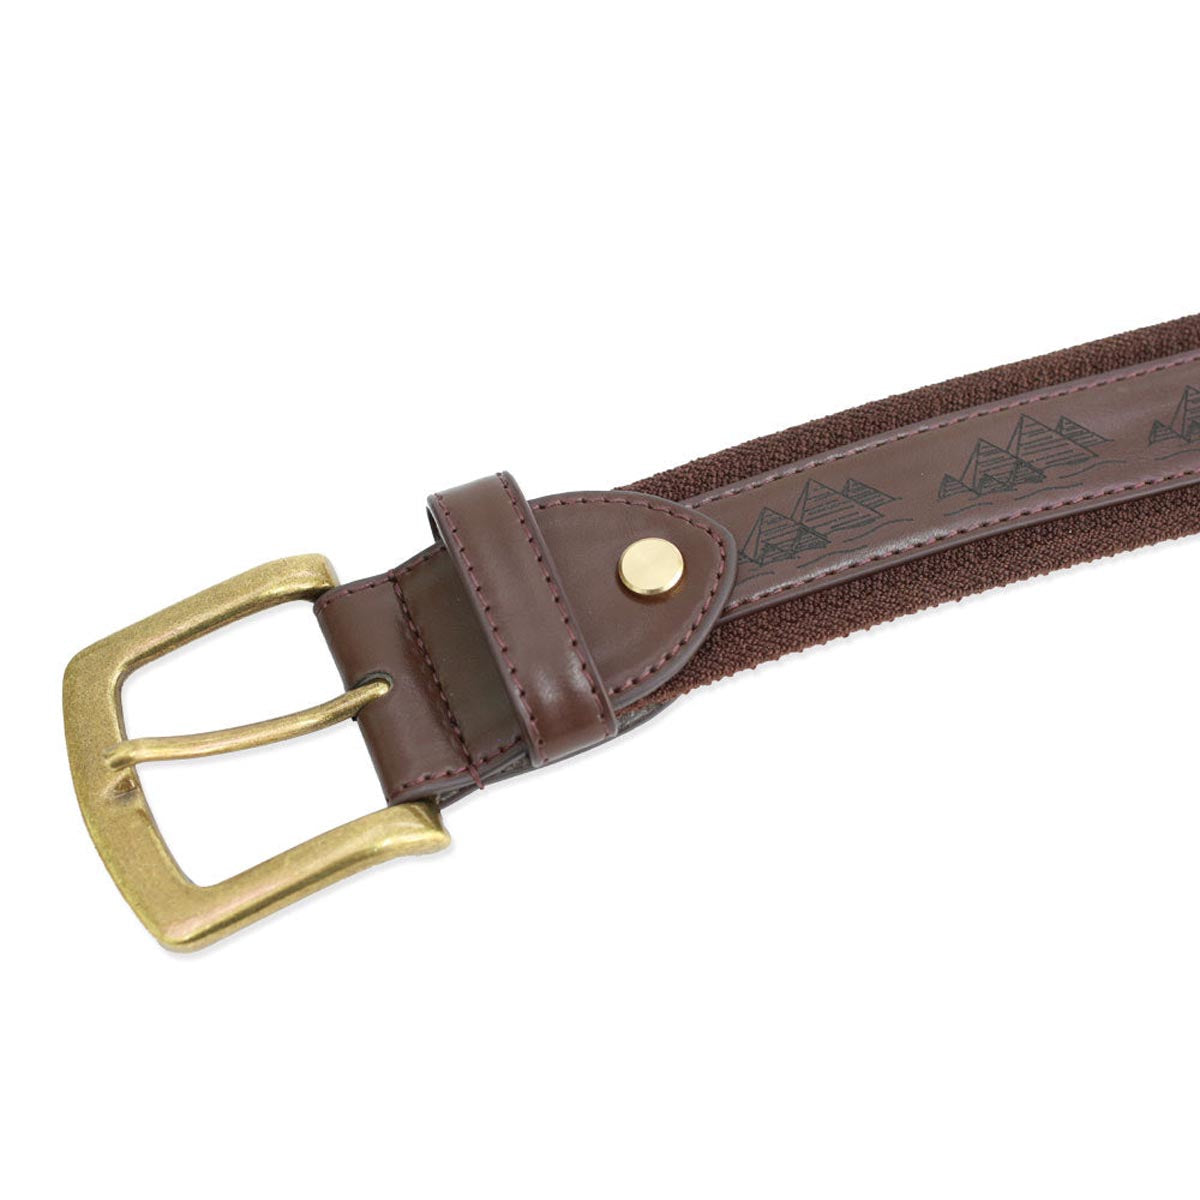 Theories As Above Vegan Leather Belt - Brown image 3